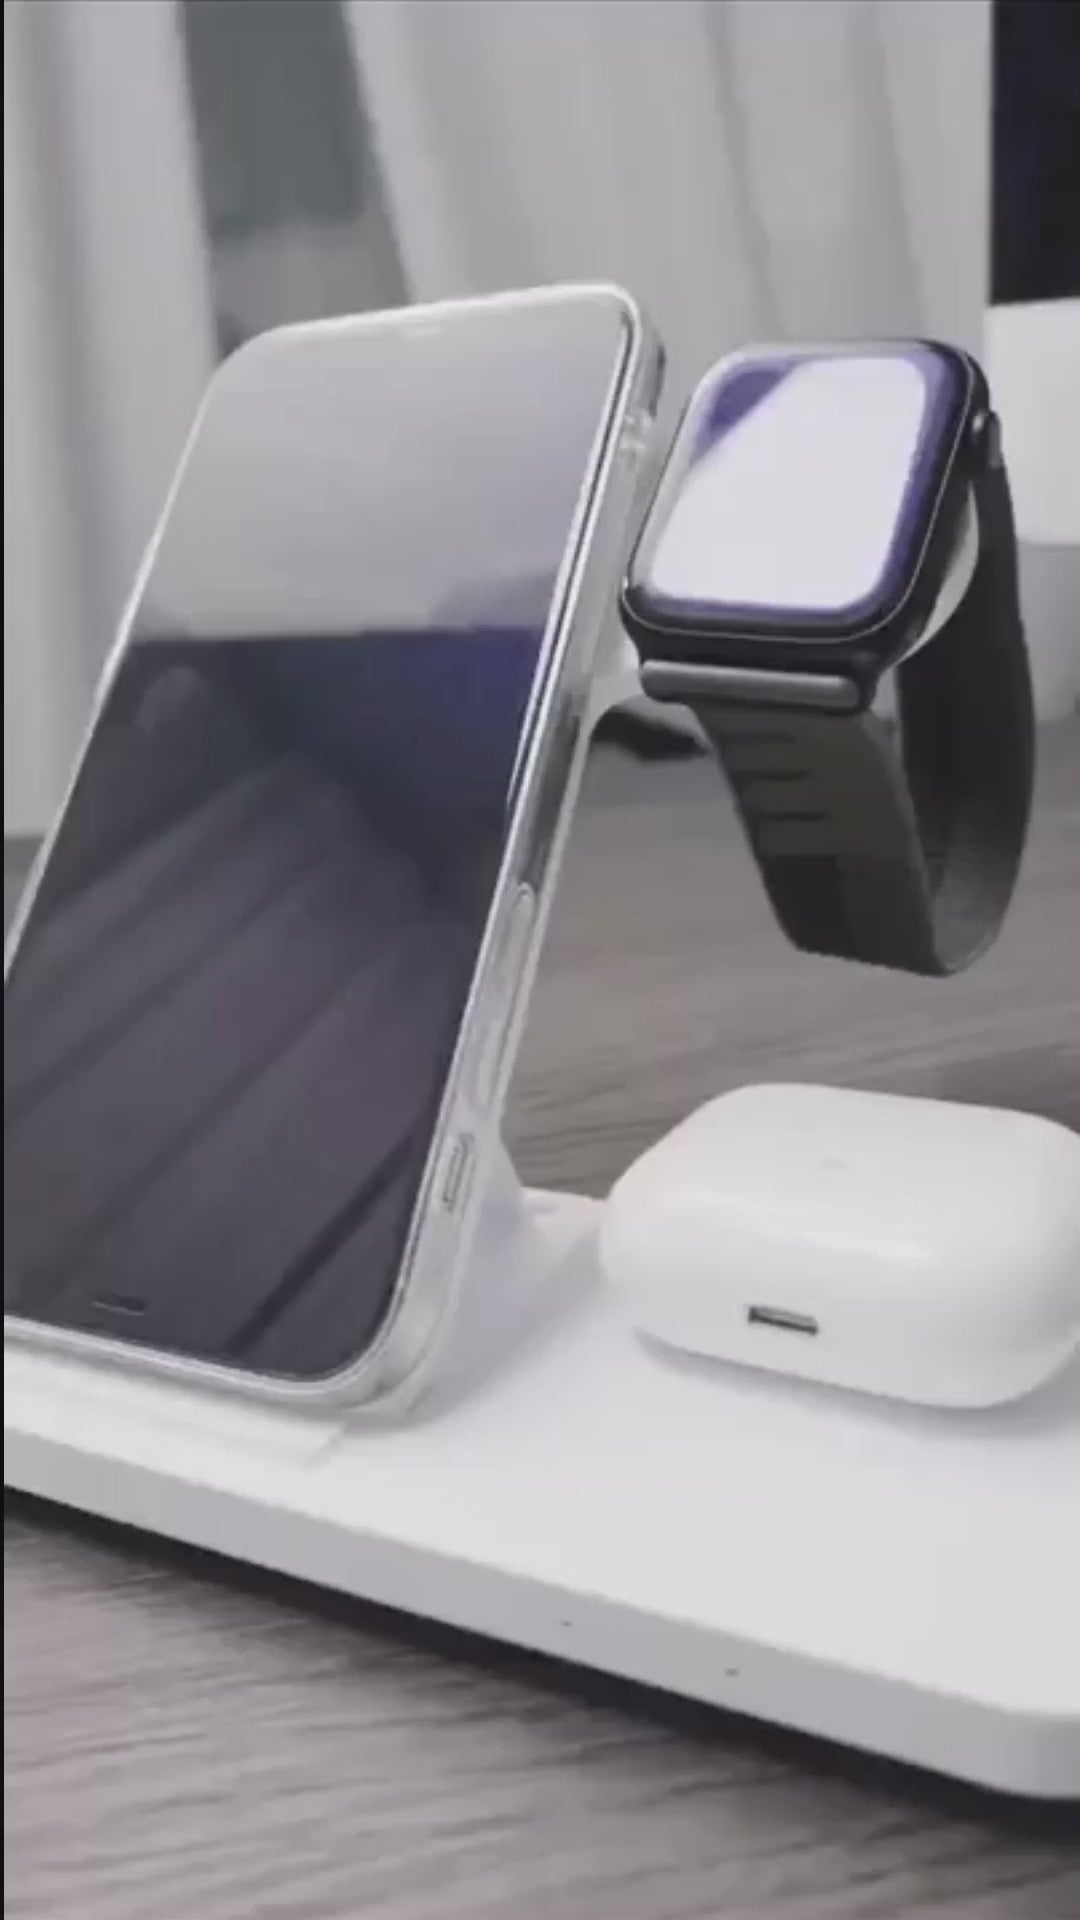 Foldable 3-in-1 Wireless Charger with 15W Fast Charging